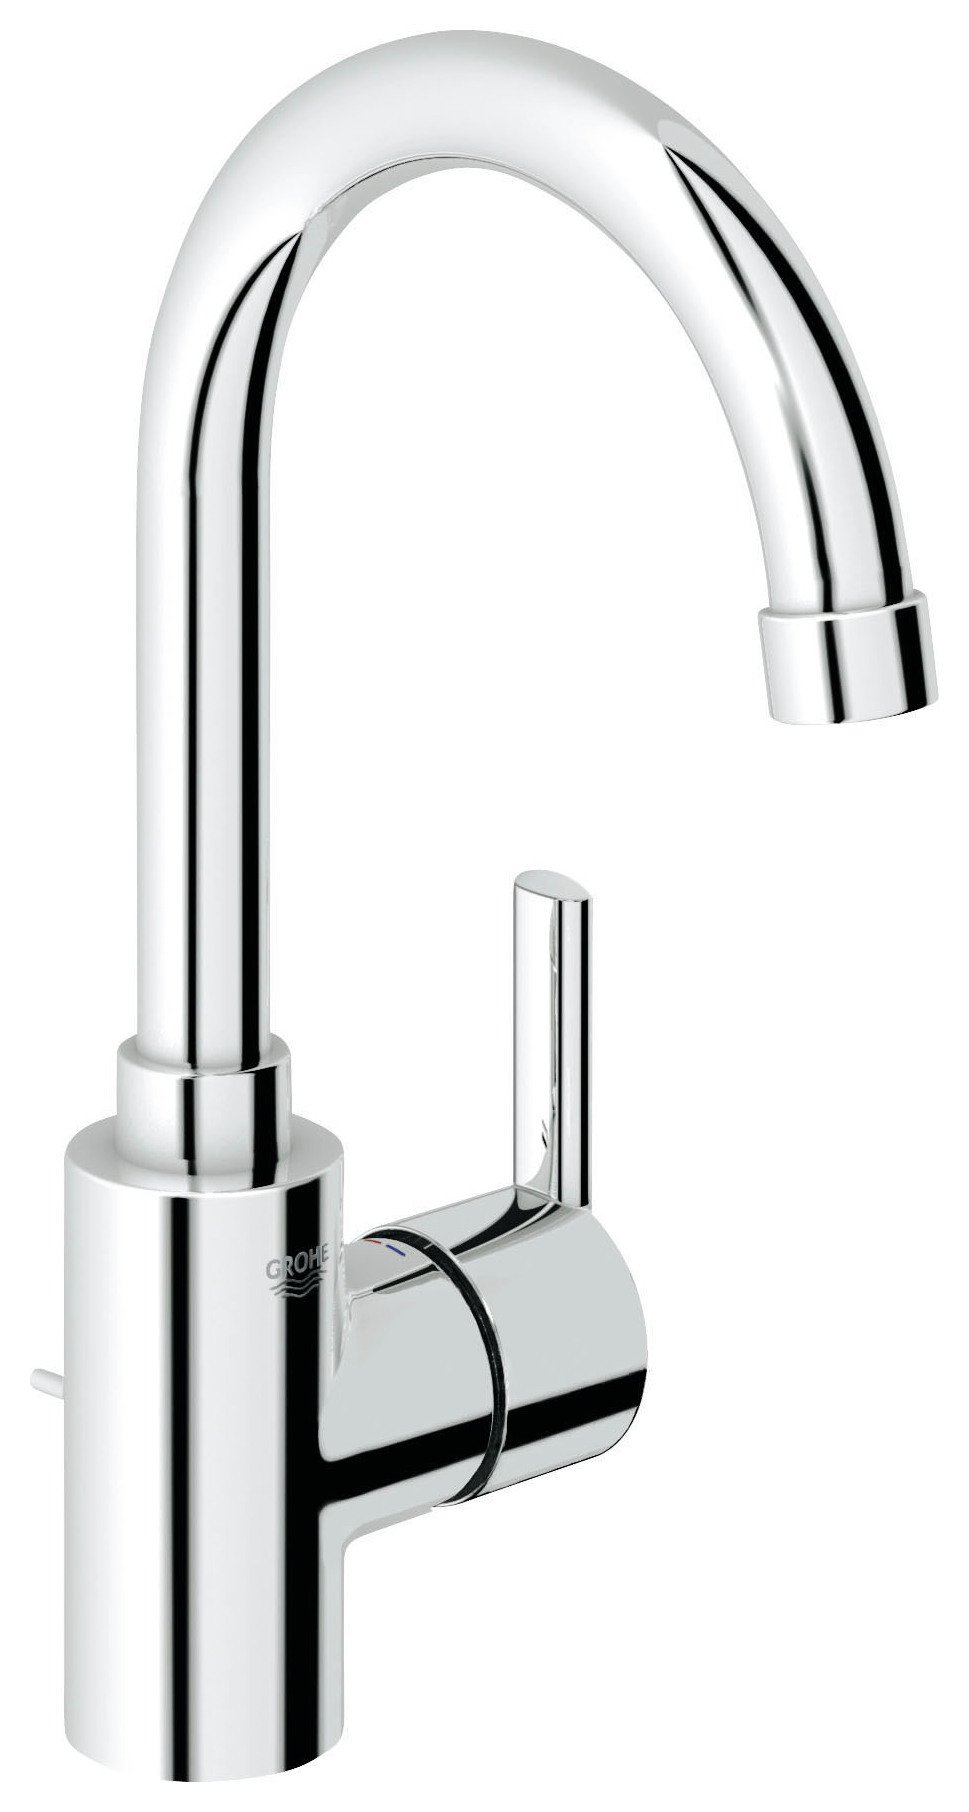 Grohe Feel Basin Mixer Tap with High Spout